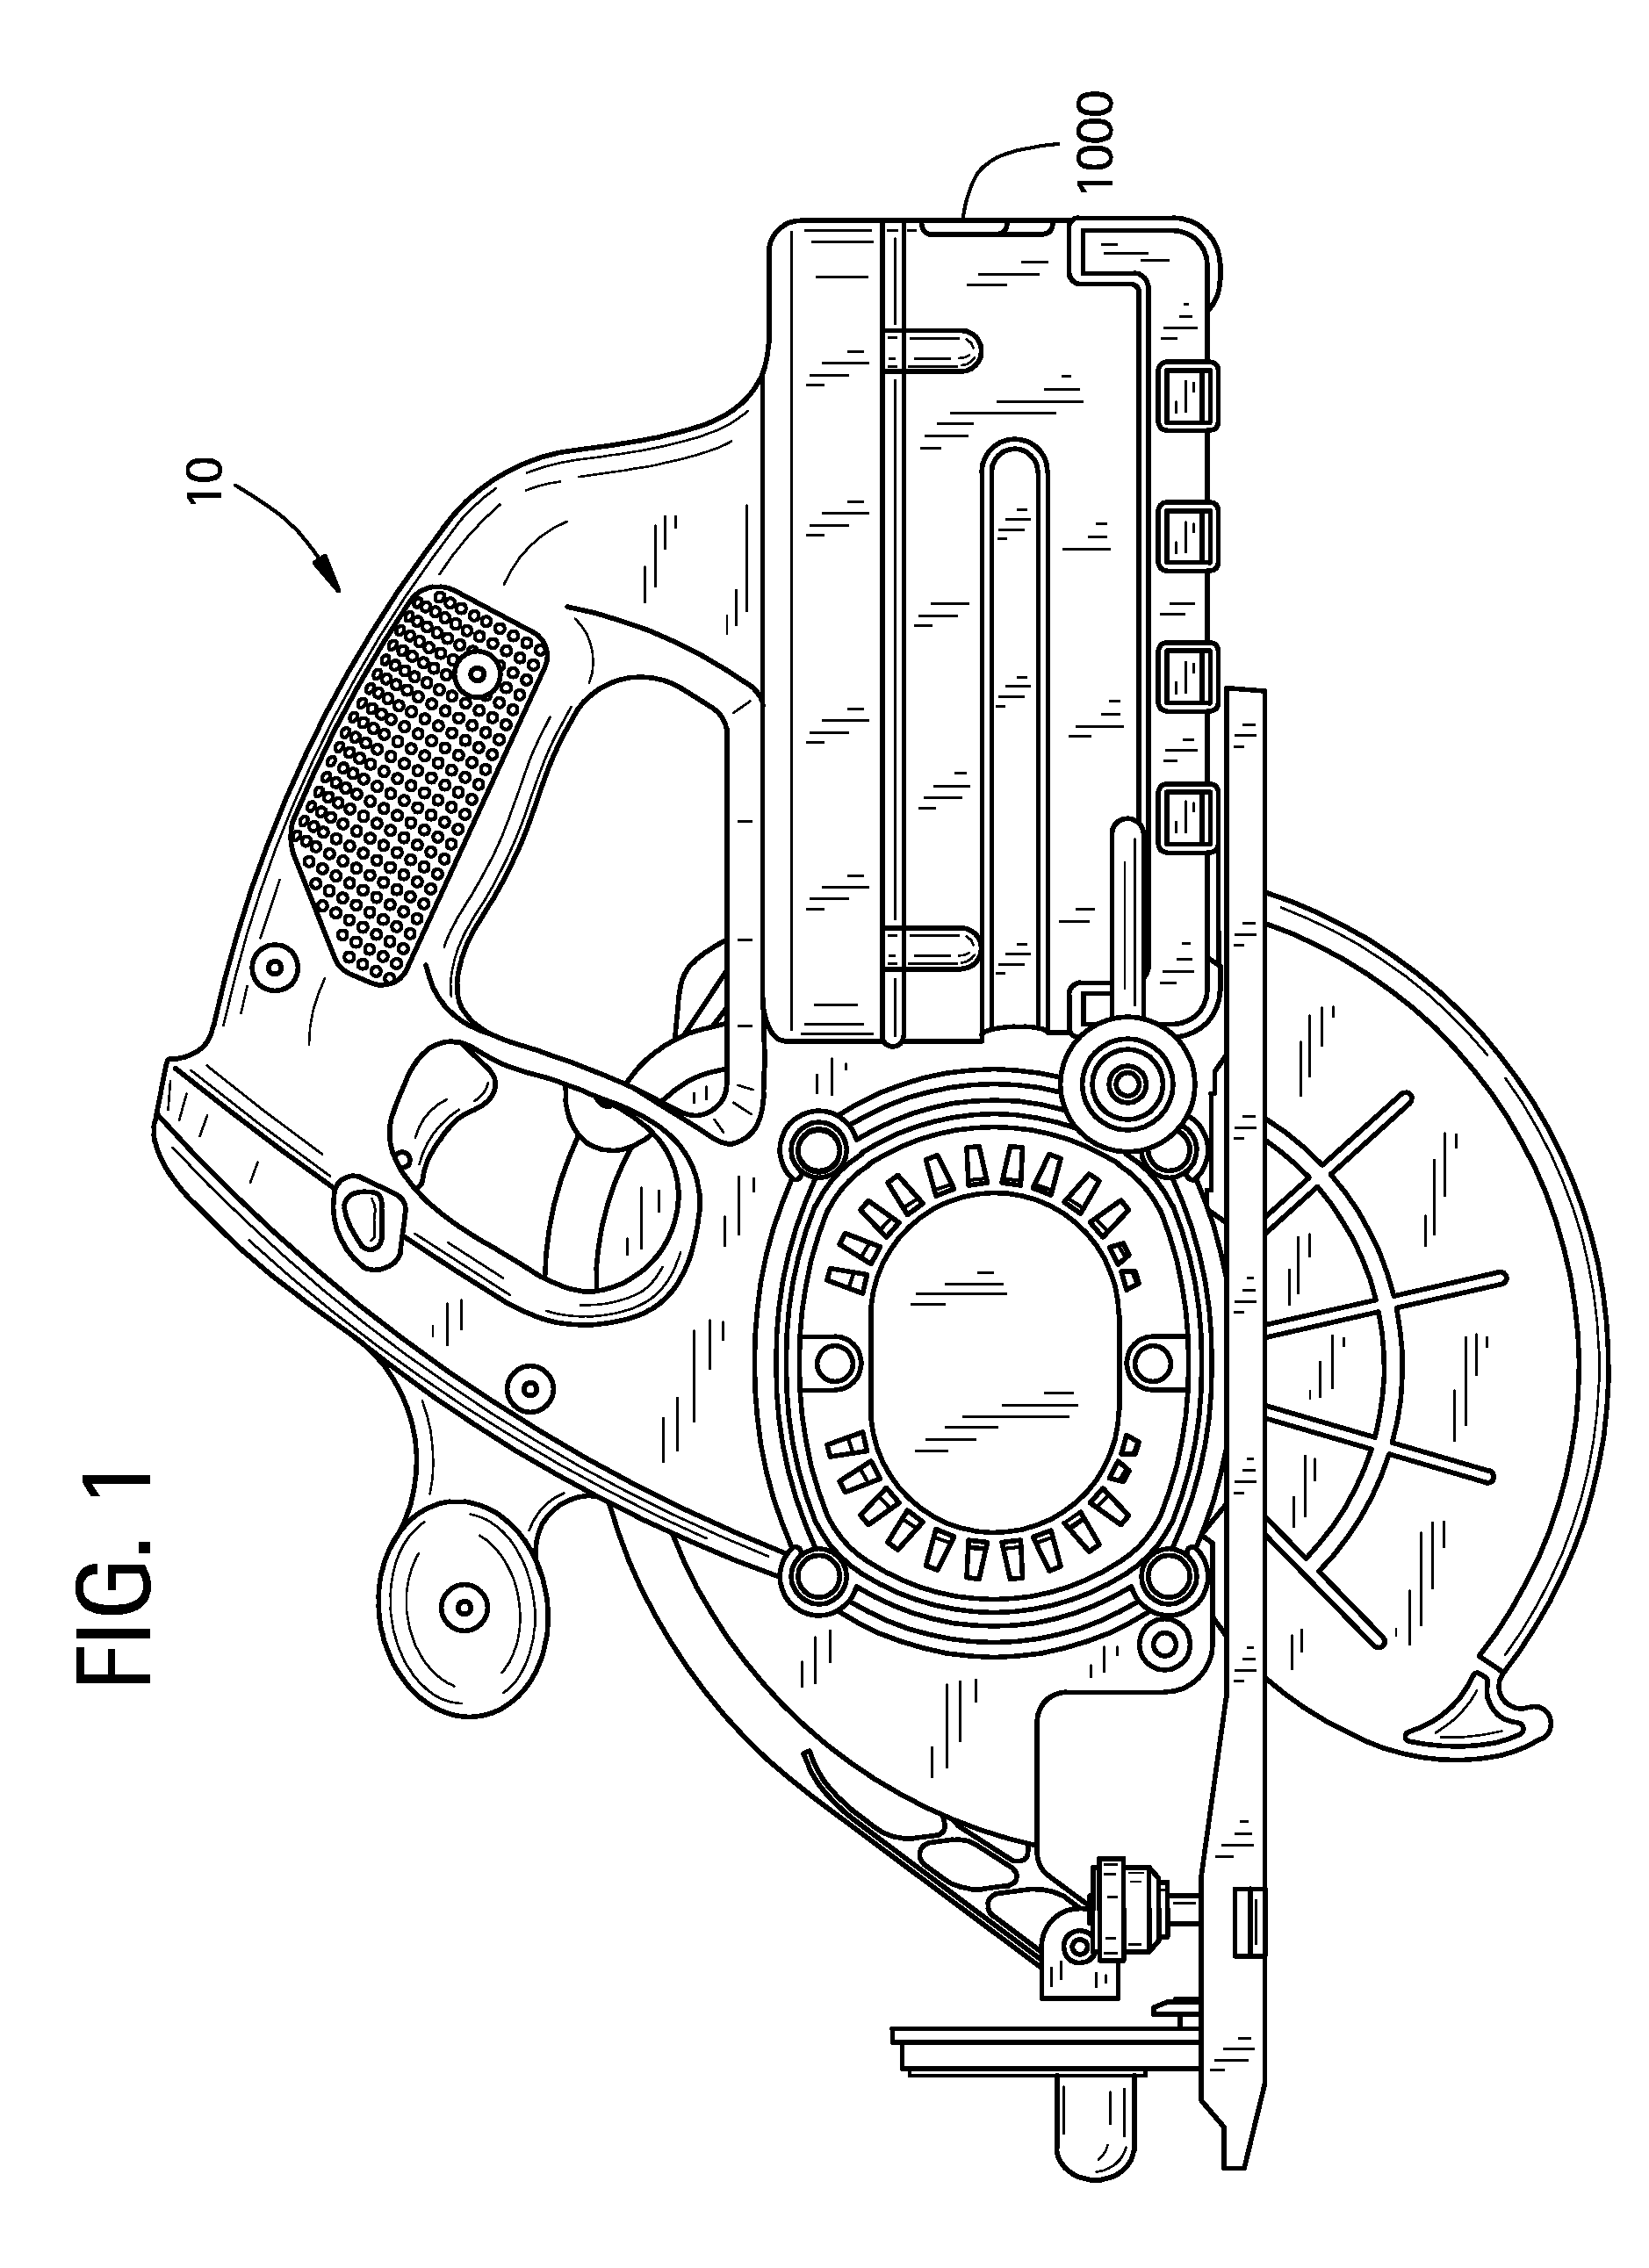 Methods of charging battery packs for cordless power tool systems